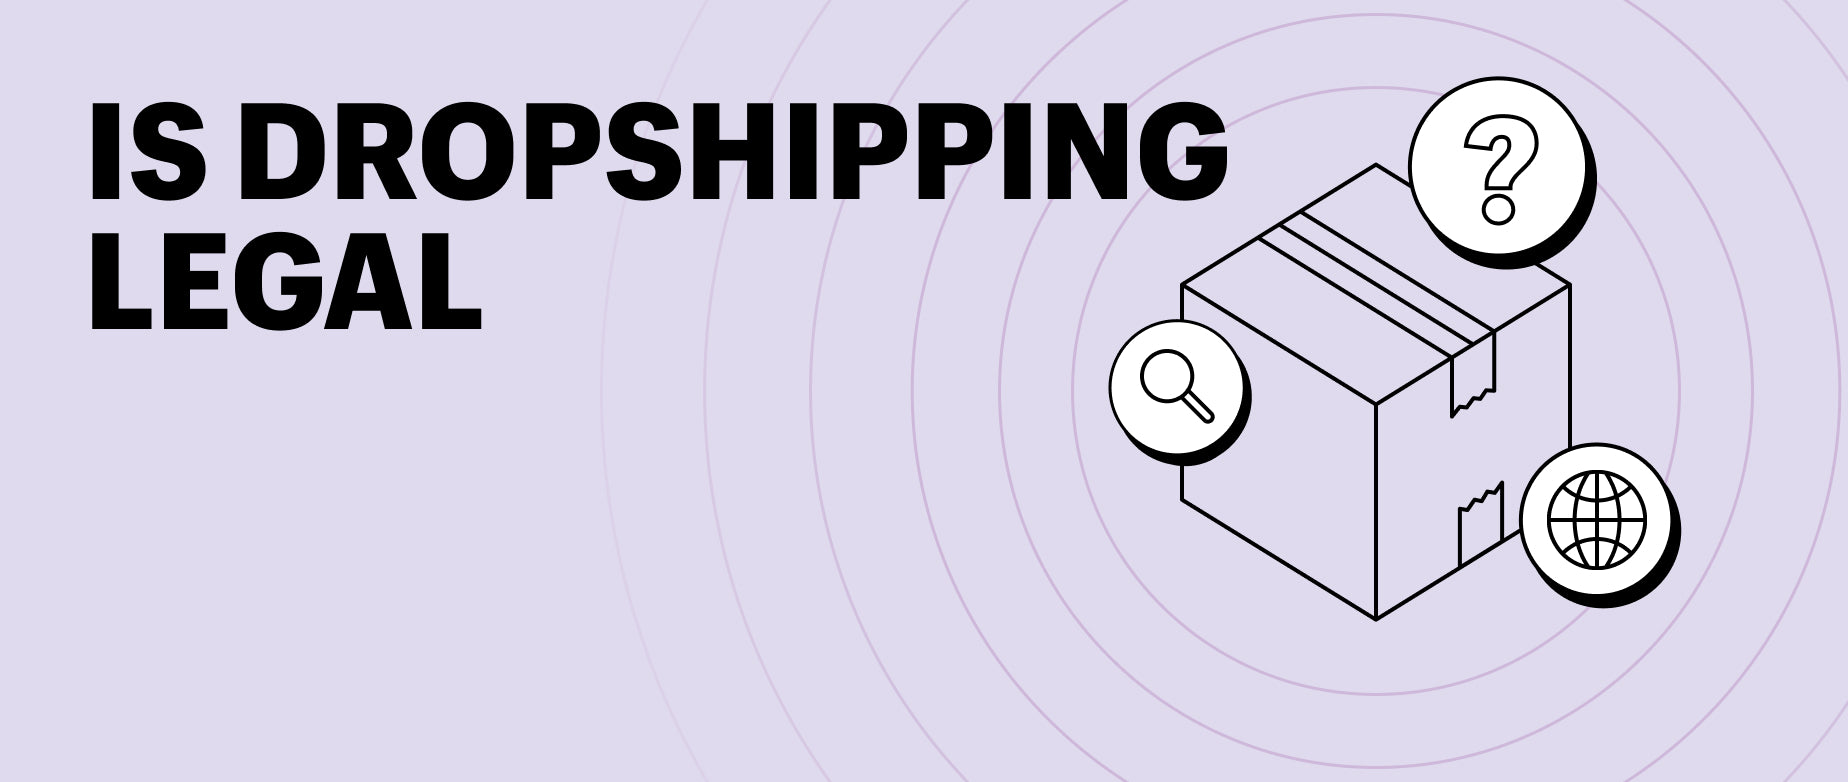 Banner image about the legality of dropshipping with illustration of a box with question marks around it